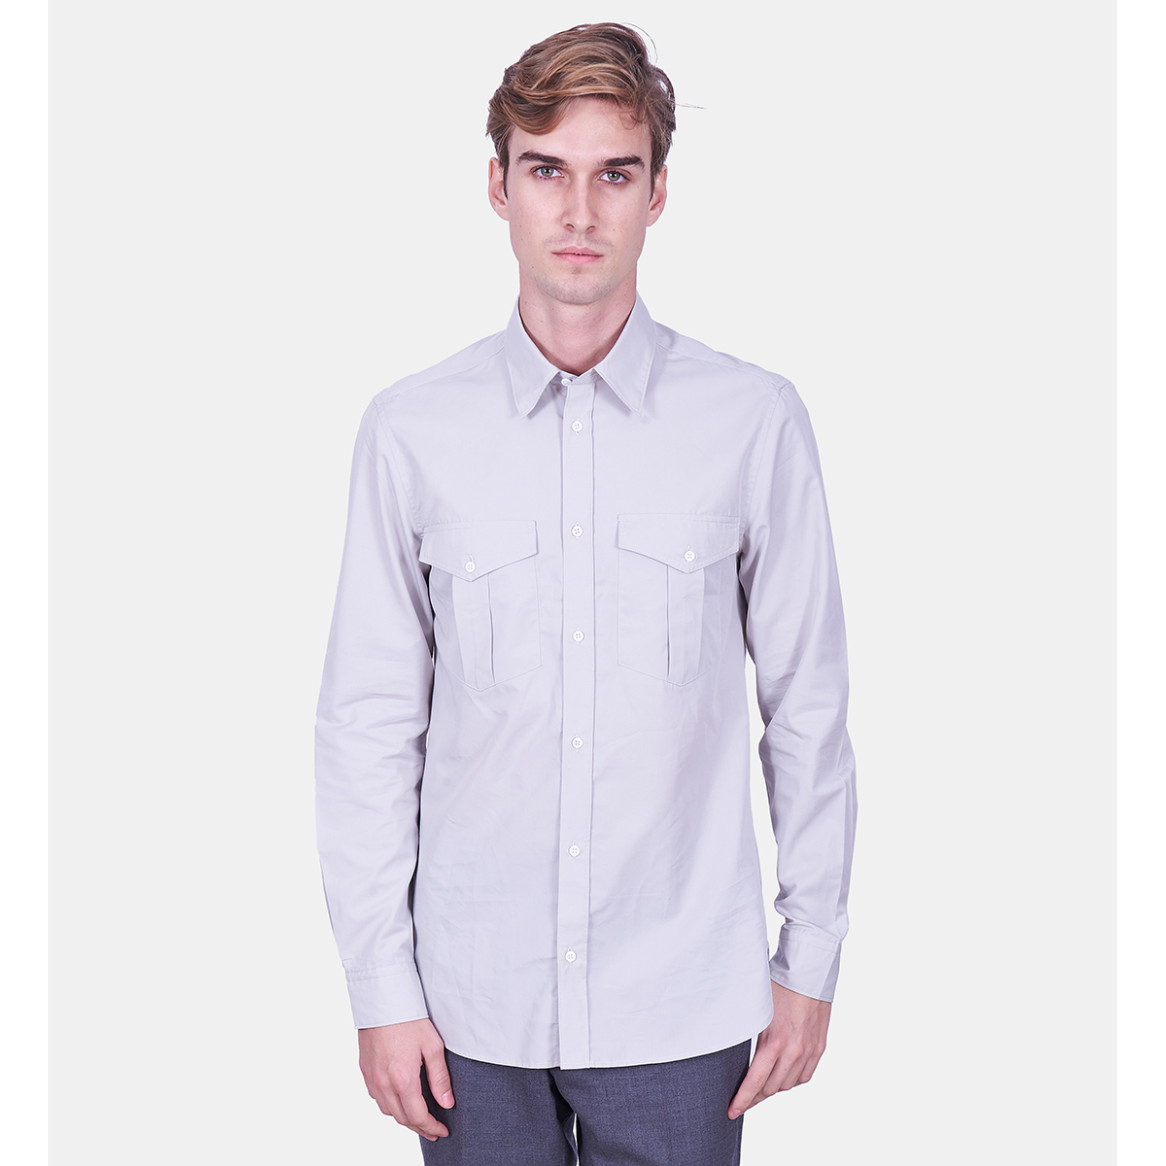 Chemise CHAD gris perle